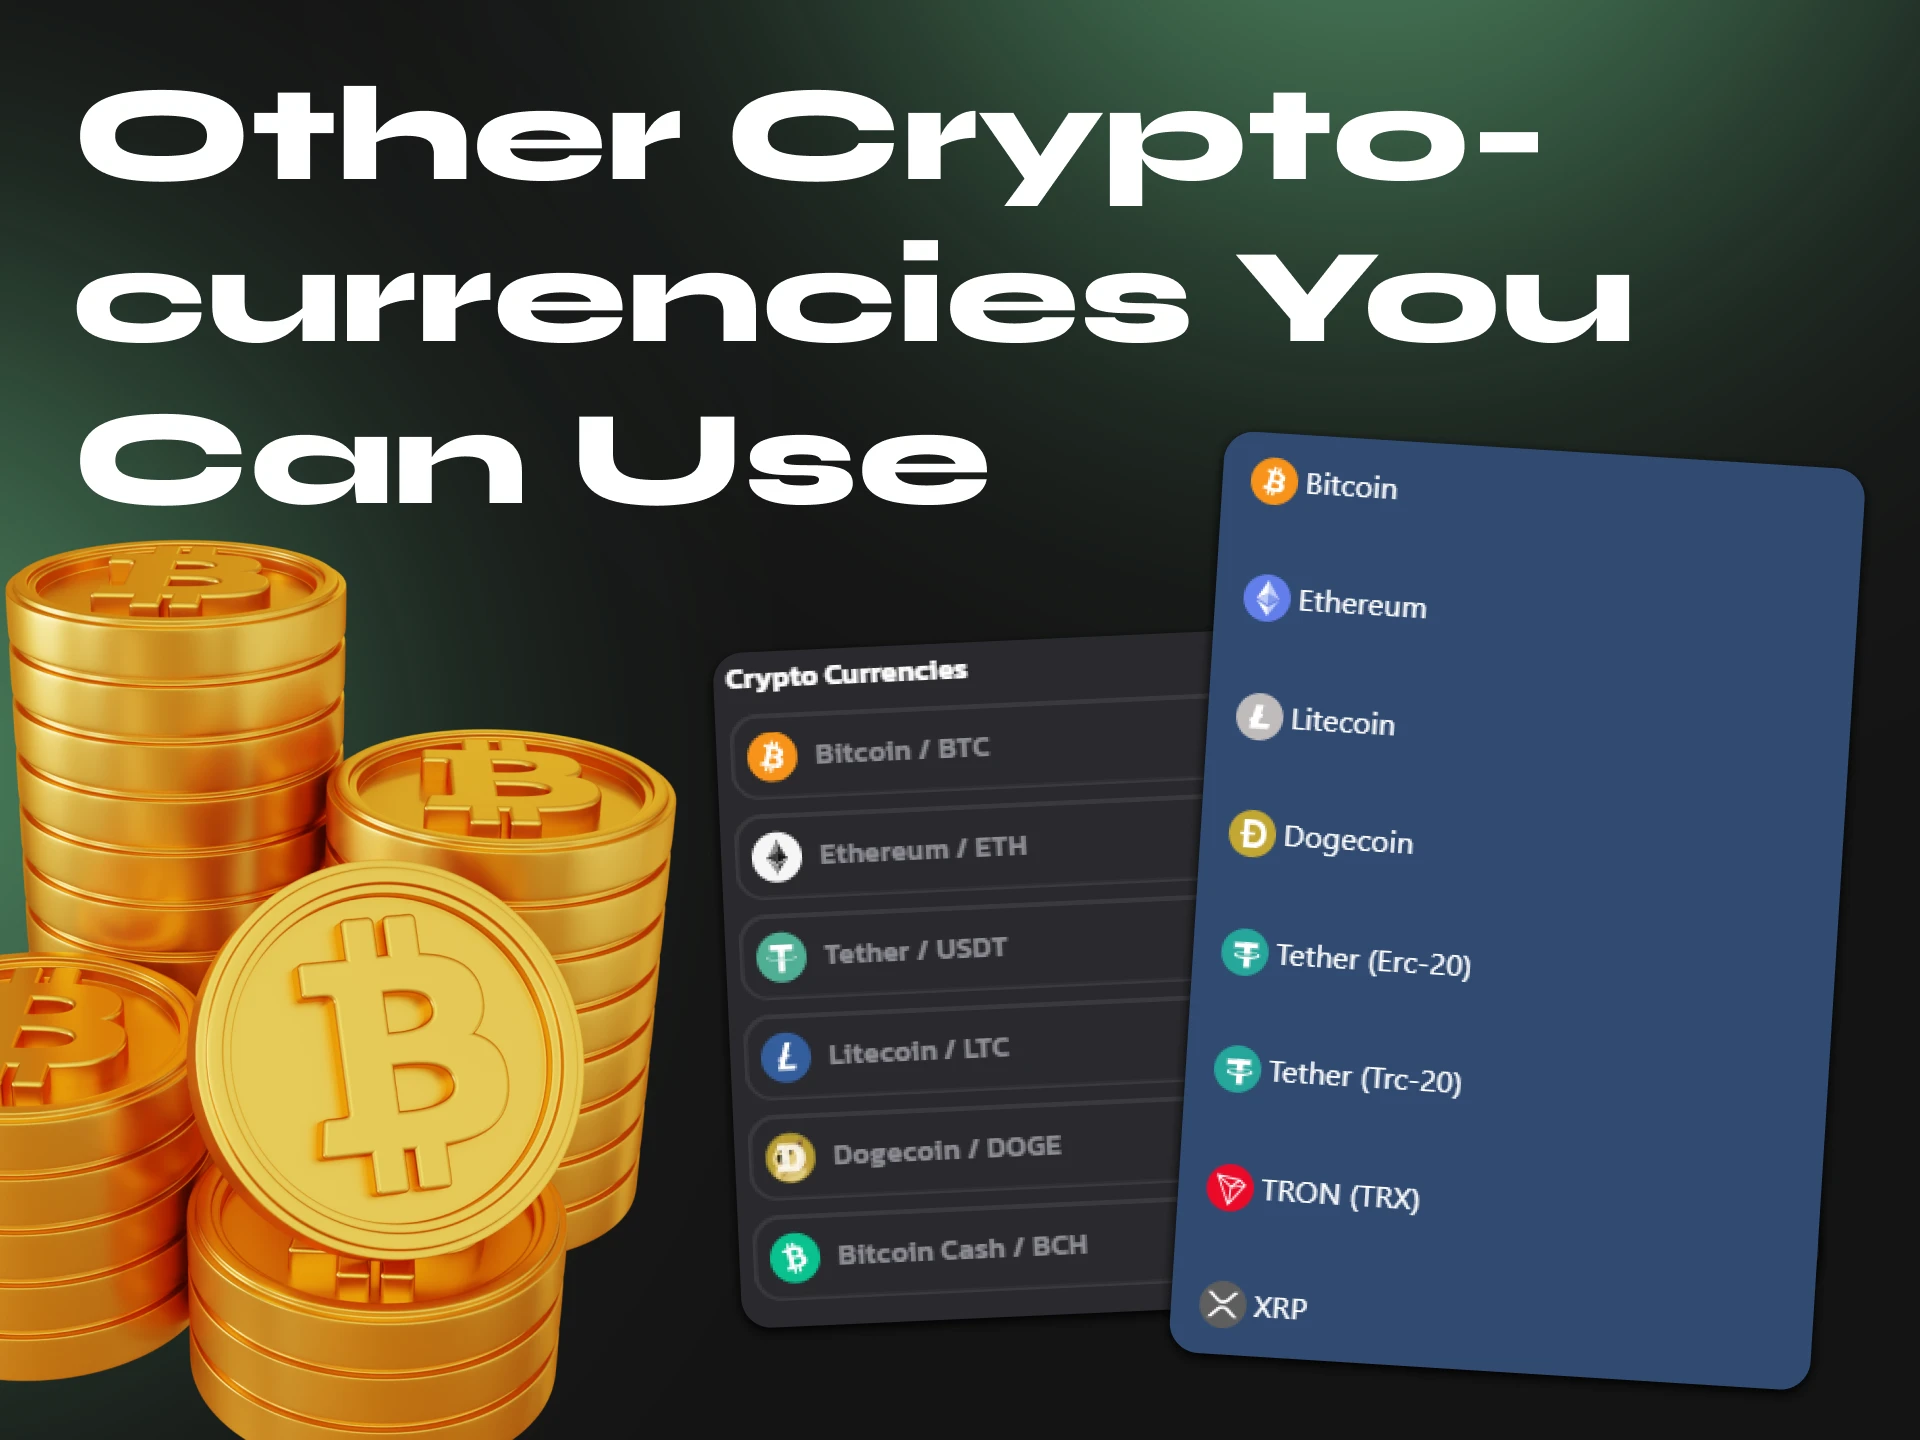 You have a large selection of cryptocurrencies that you can use to bet on poker at crypto casinos.